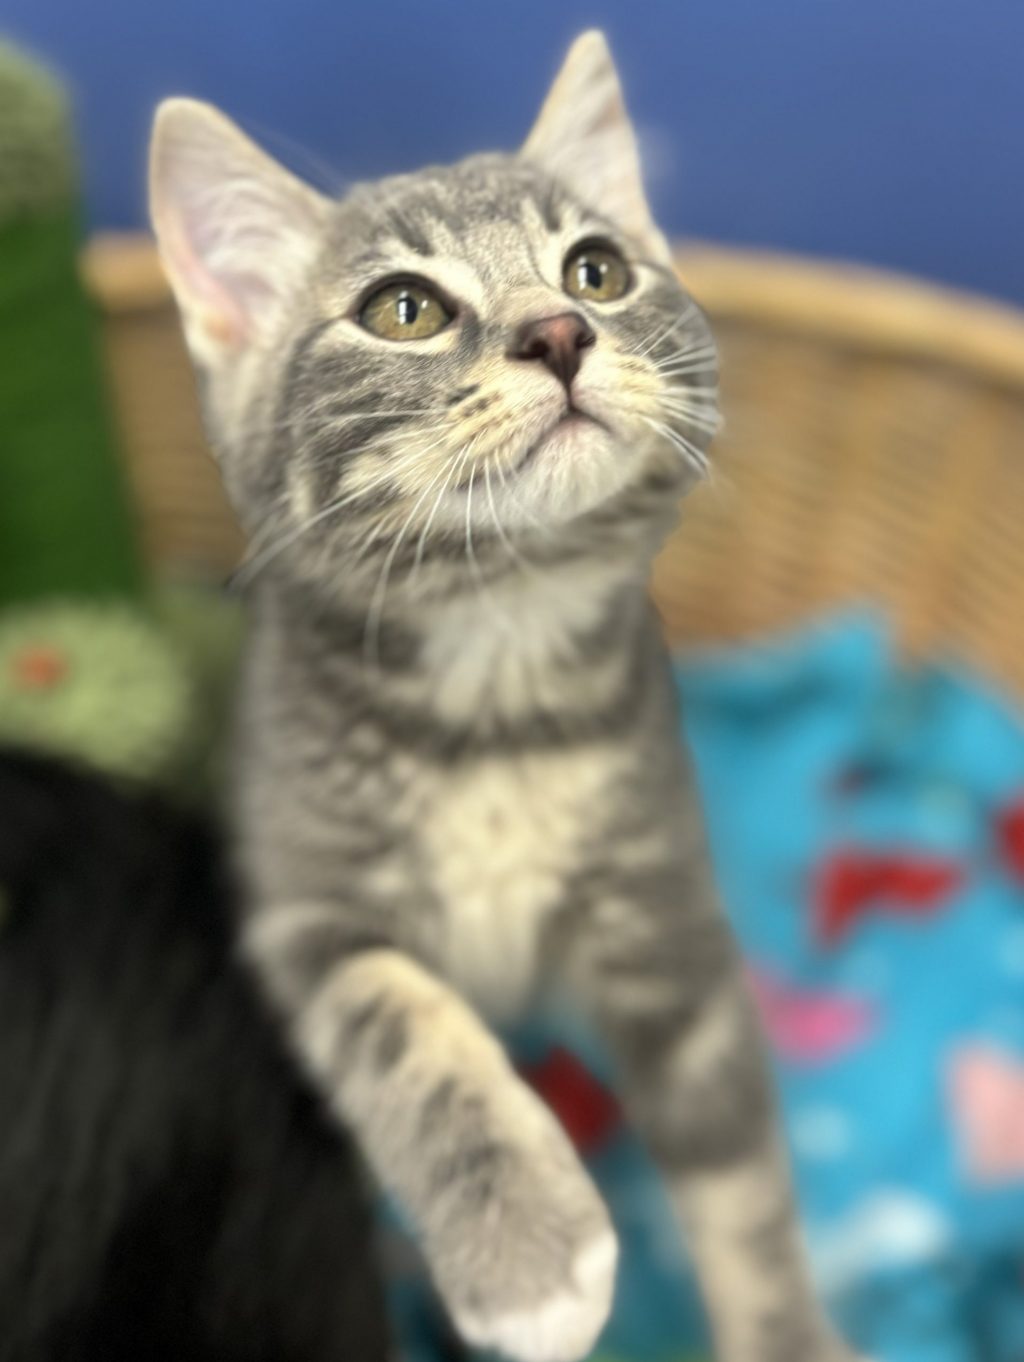 Born April 23,2024 meet Armani! Armani is a very sweet cuddly baby who loves to explore new things! He gets along great with other cats but hasn't met any dogs. He loves to get pets but absolutely loves to play with any and all toys! Armani is available for adoption, come meet this sweet boy!